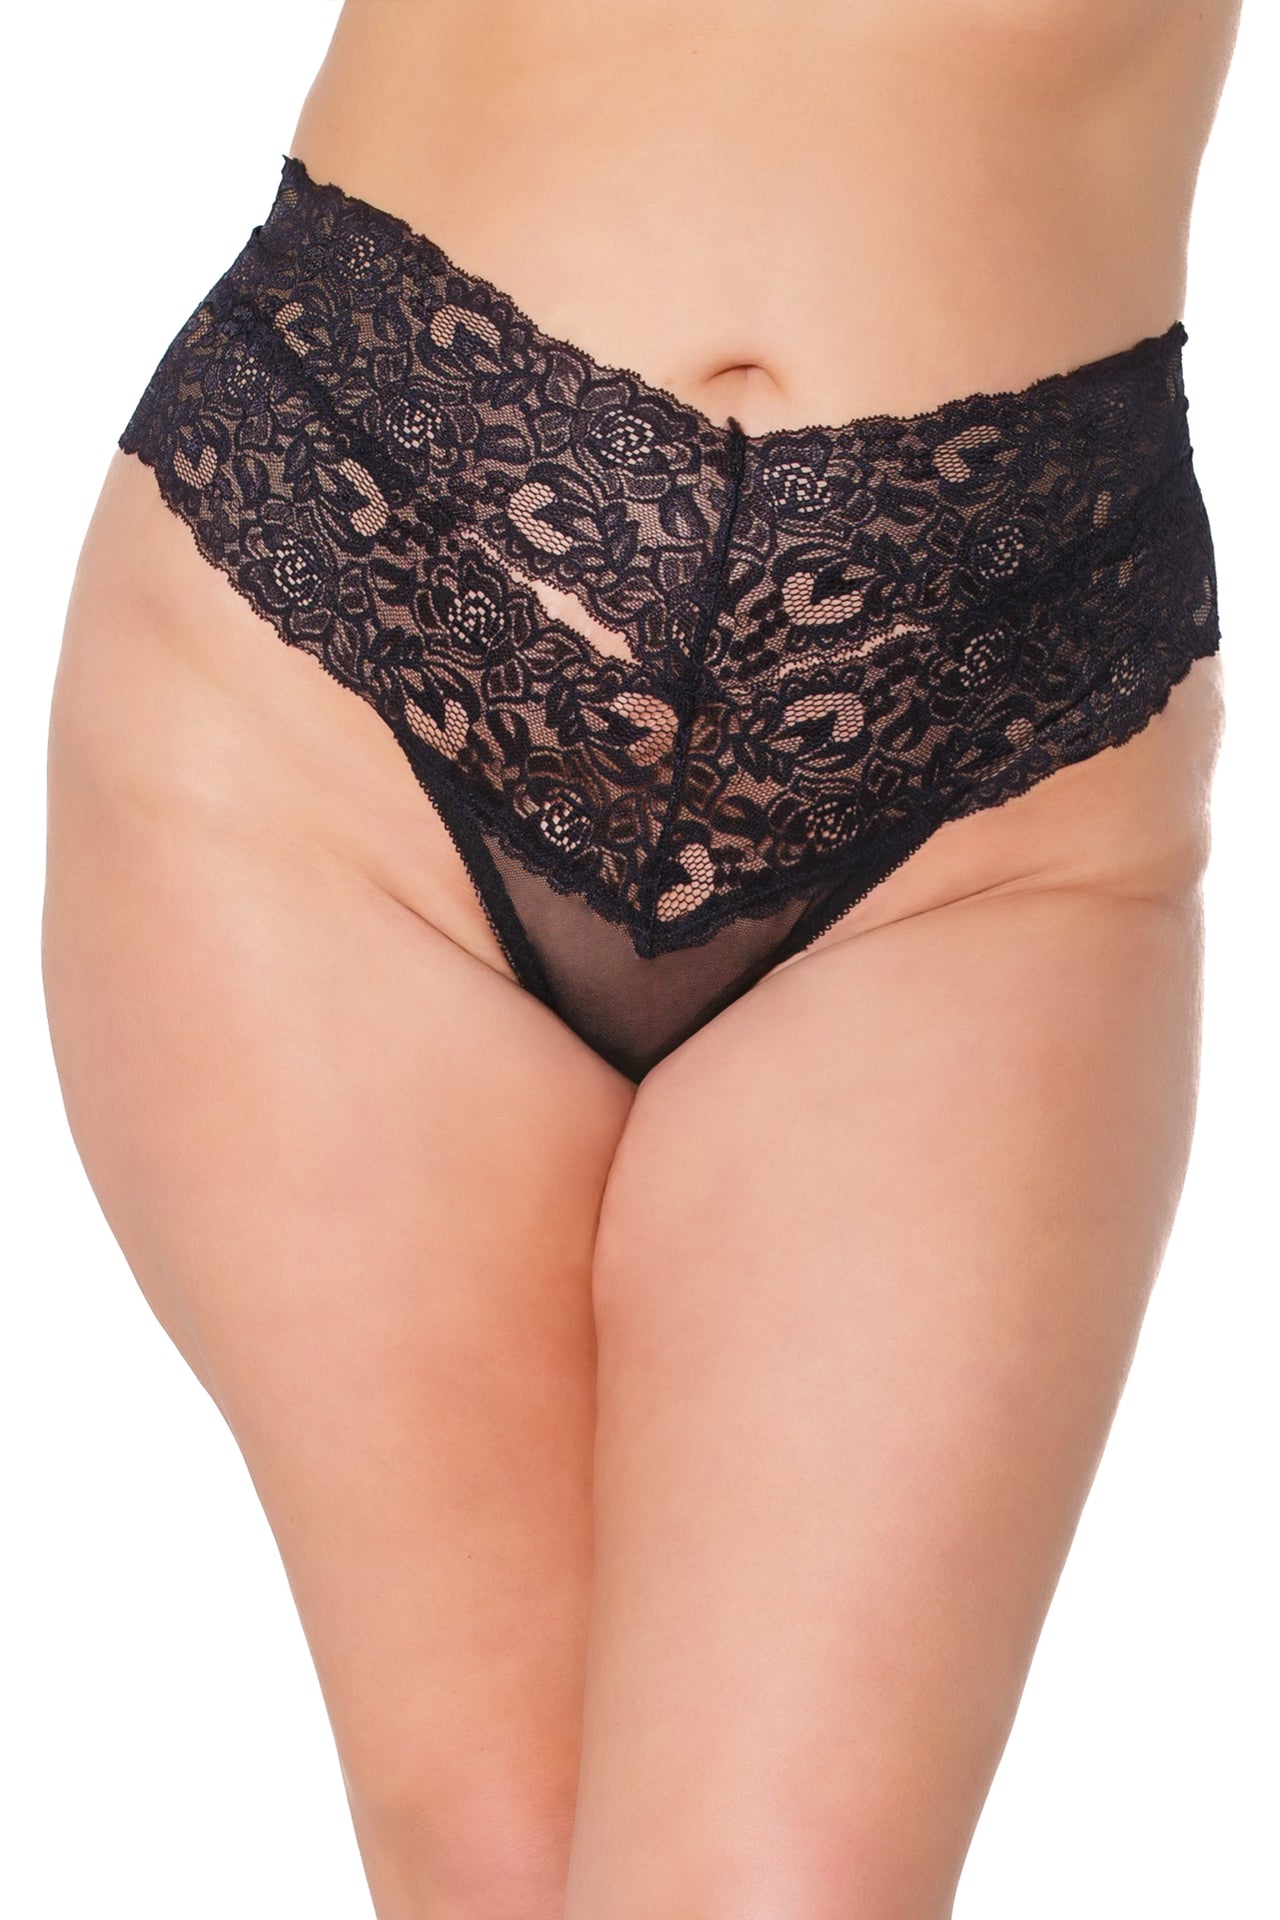 Coquette - 22333 - High Waisted Thong - Stag Shop